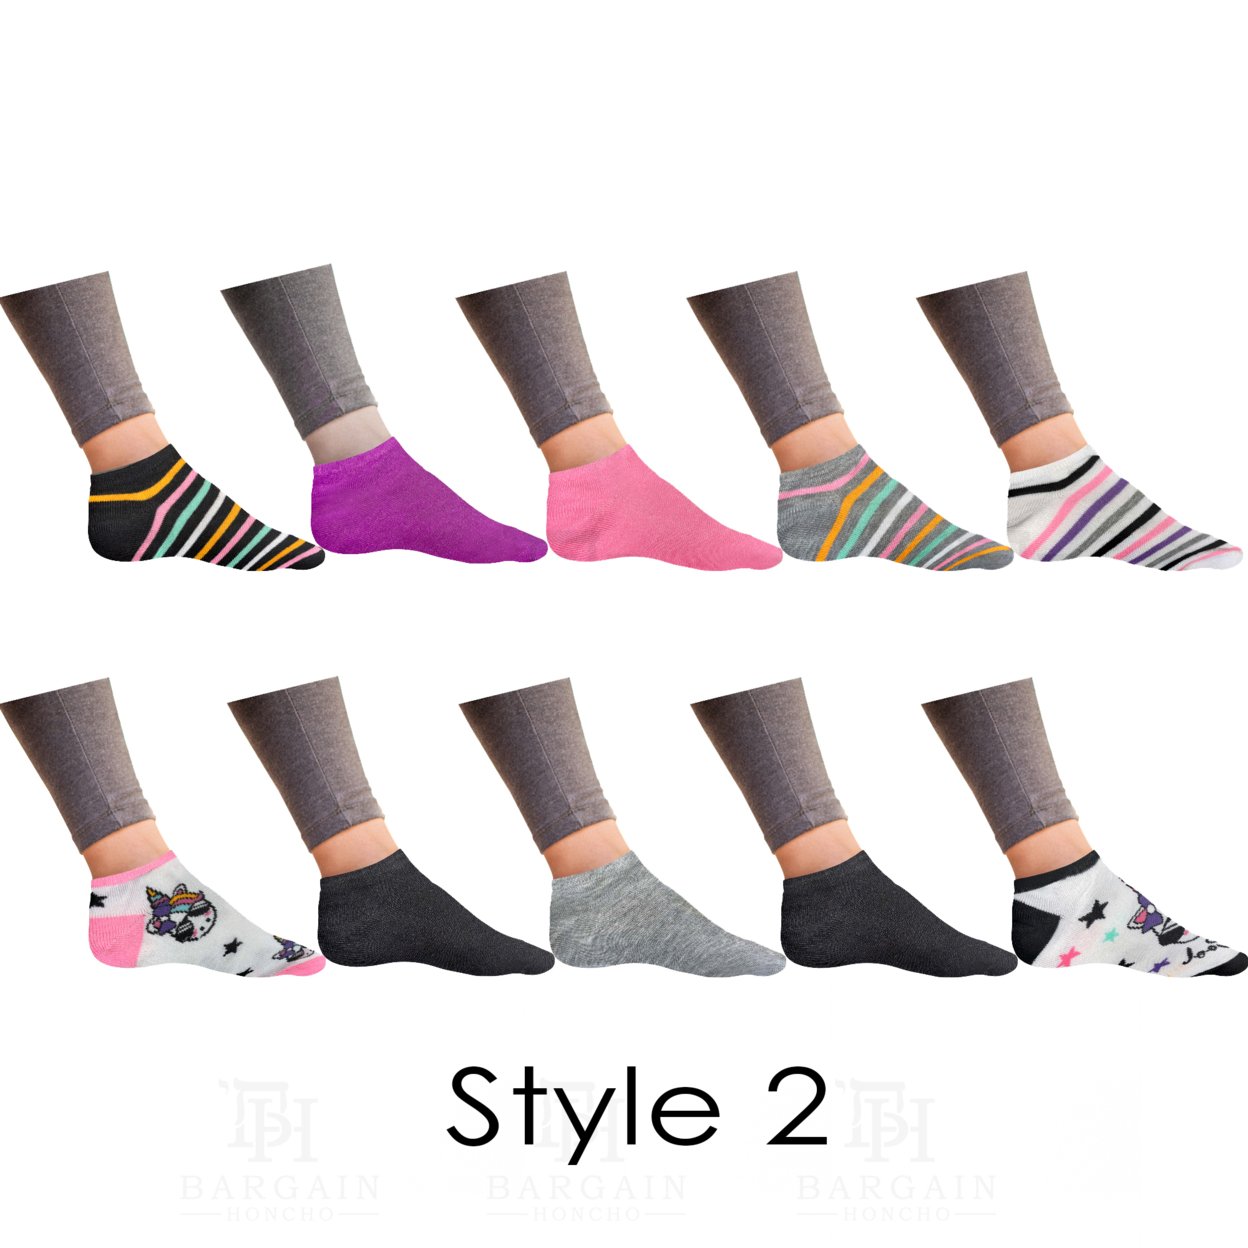 20-Pairs: Women’s Breathable Colorful Fun No Show Low Cut Ankle Socks - 2 & 4